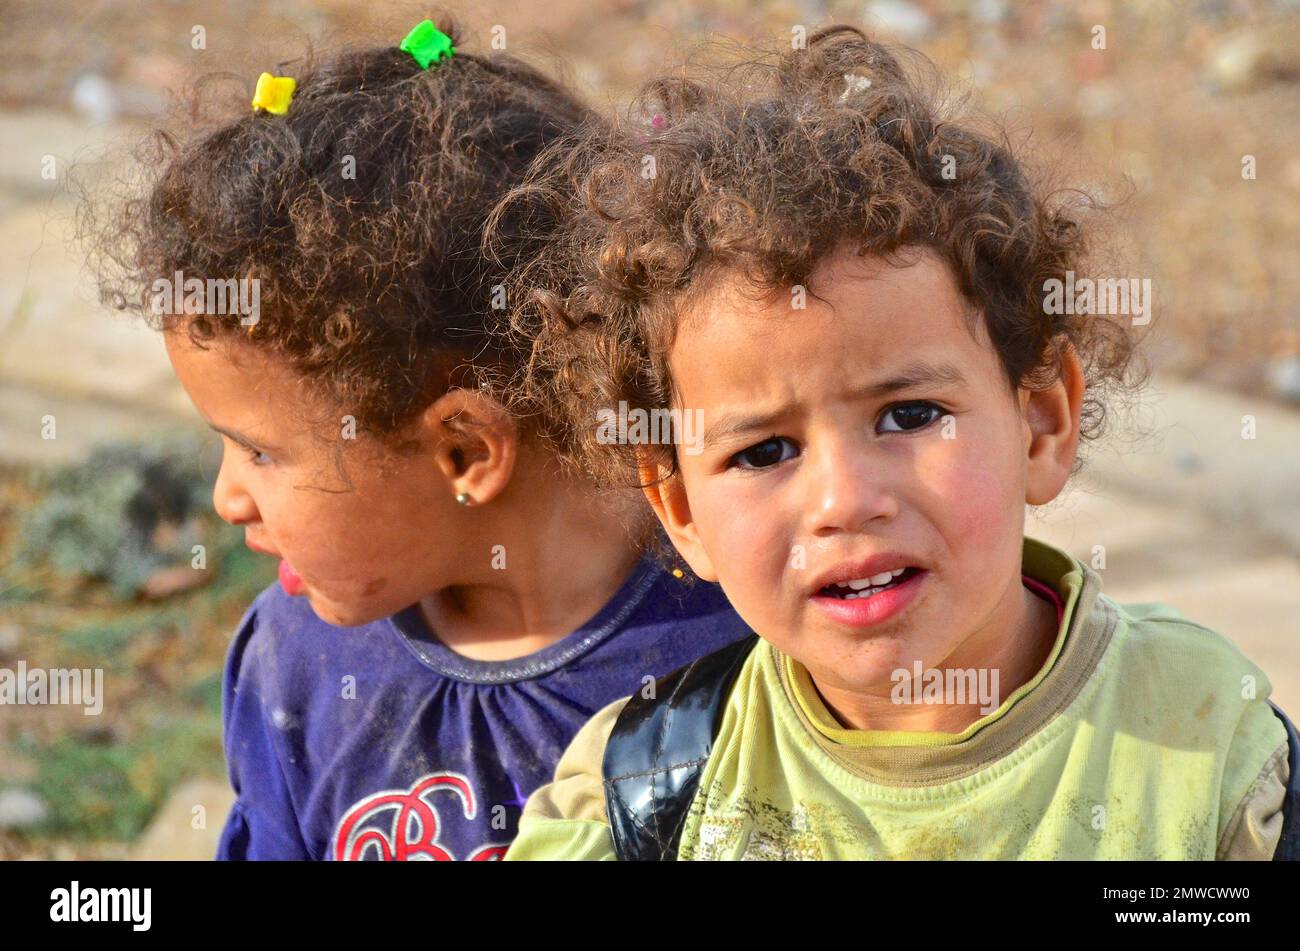 Girl looks sceptically at camera, another looks away, Morocco Stock Photo